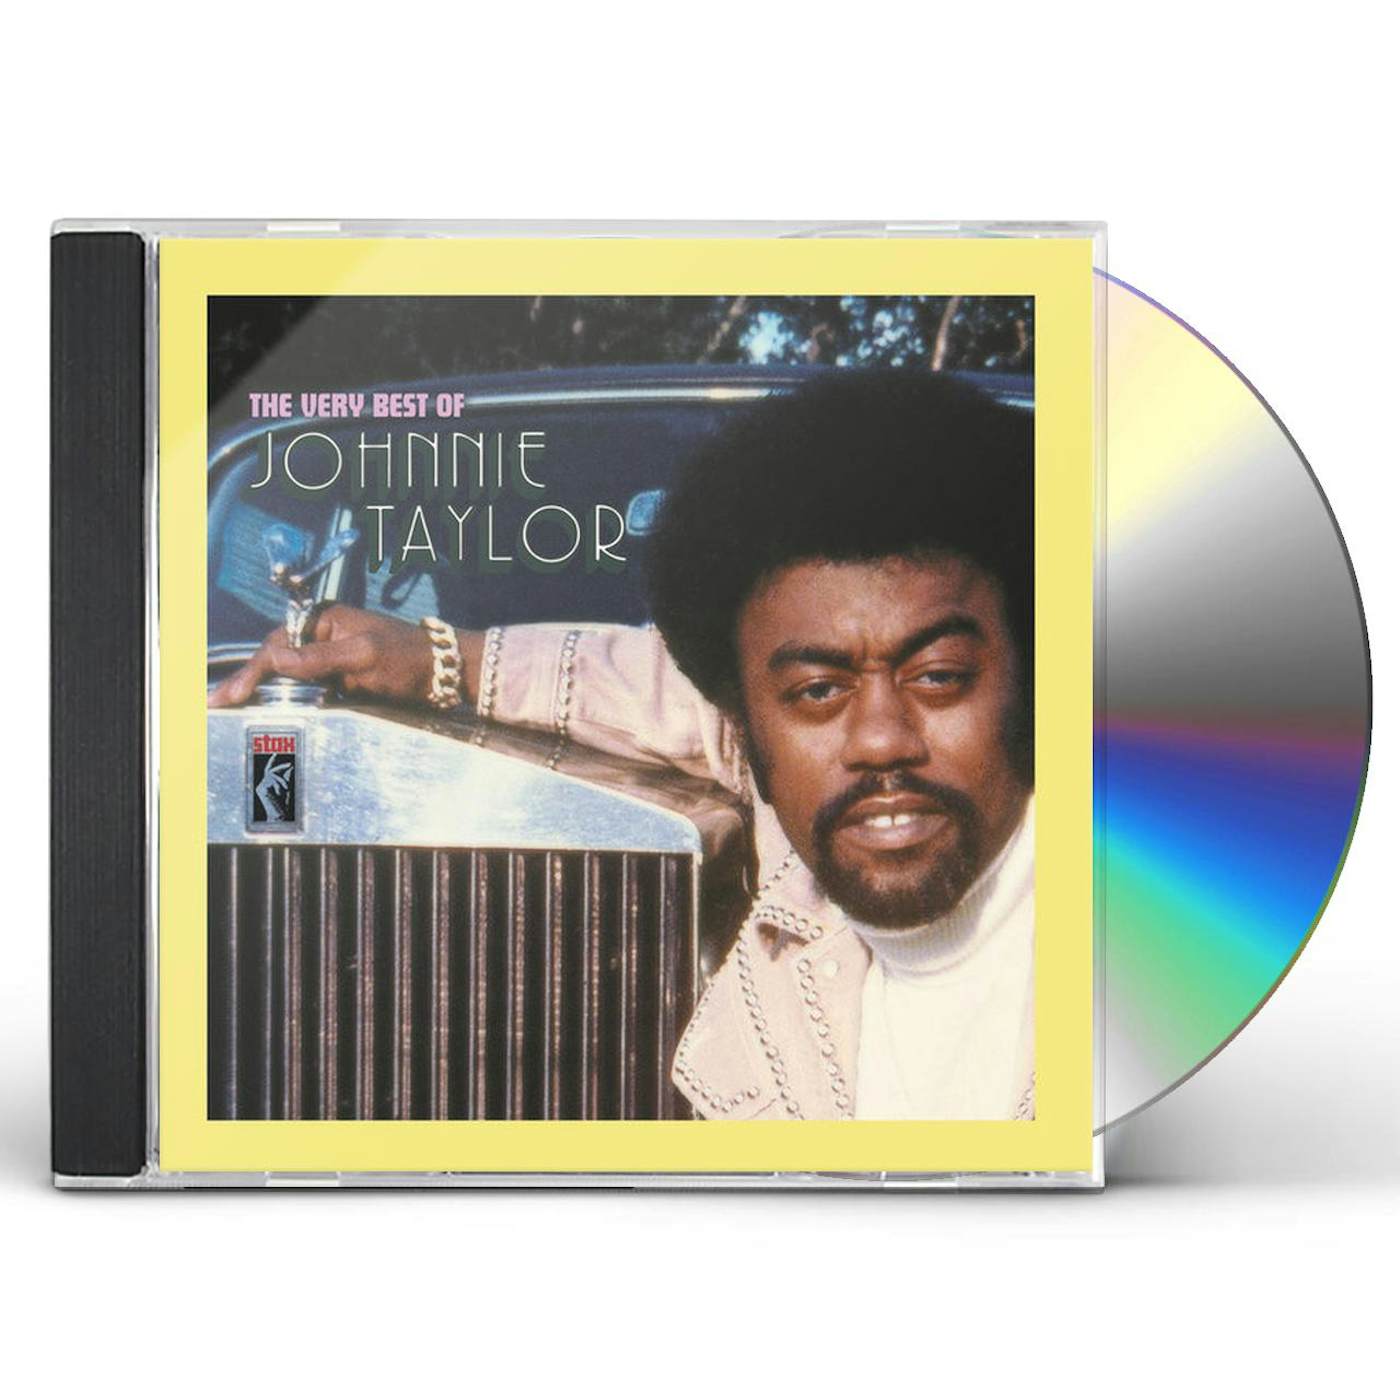 VERY BEST OF JOHNNIE TAYLOR CD